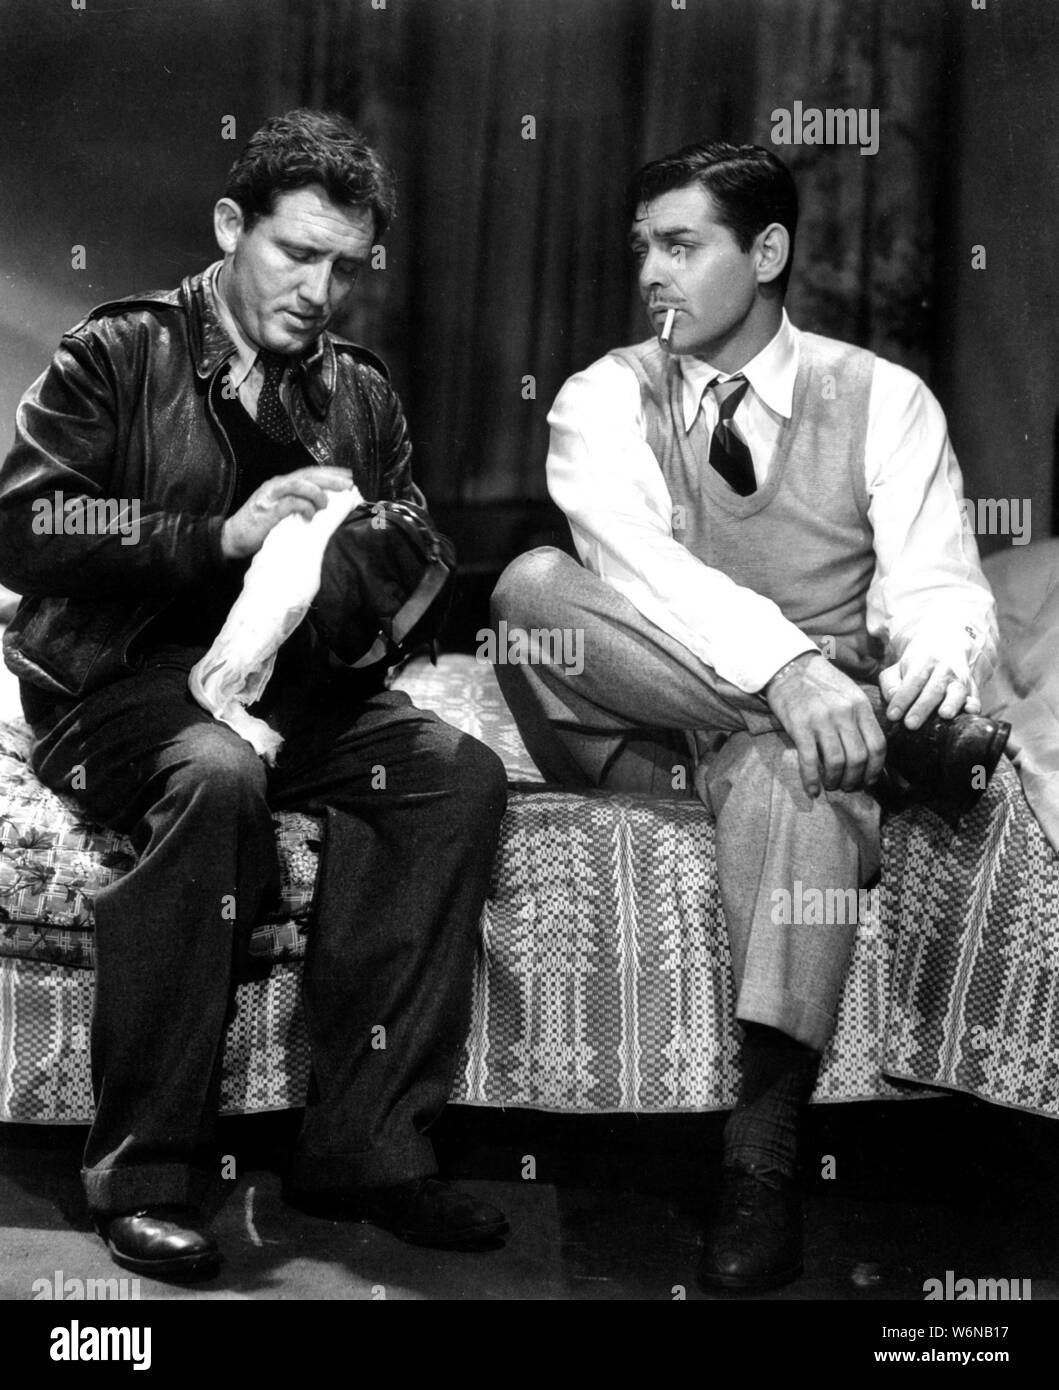 CLARK GABLE and SPENCER TRACY in BOOM TOWN (1940), directed by JACK CONWAY. Credit: M.G.M / Album Stock Photo